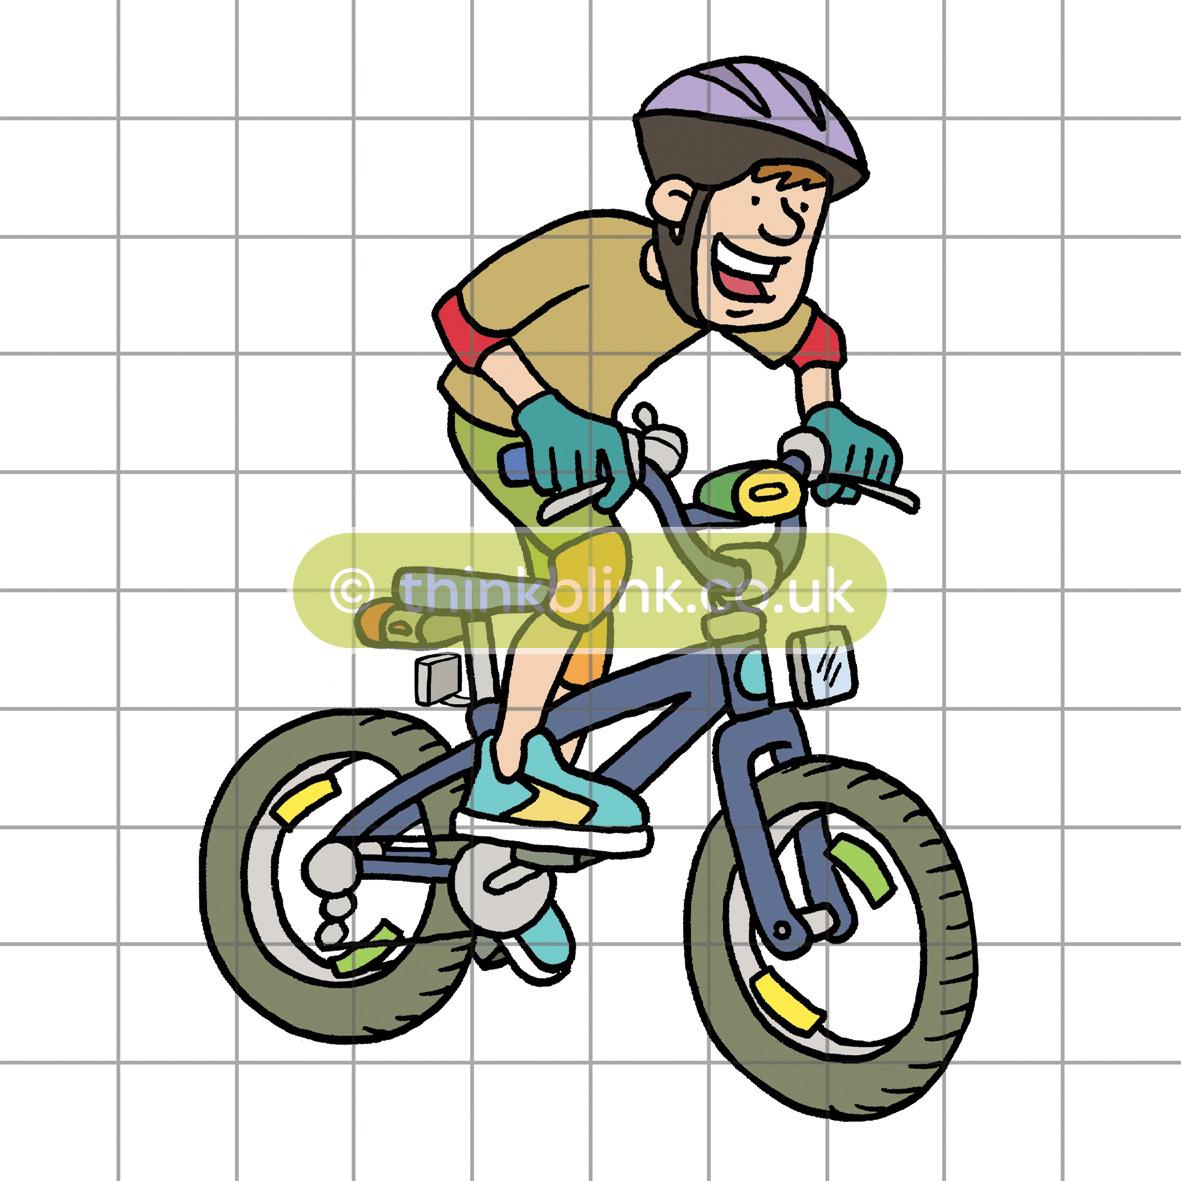 Copy drawing of person riding a bike cartoon